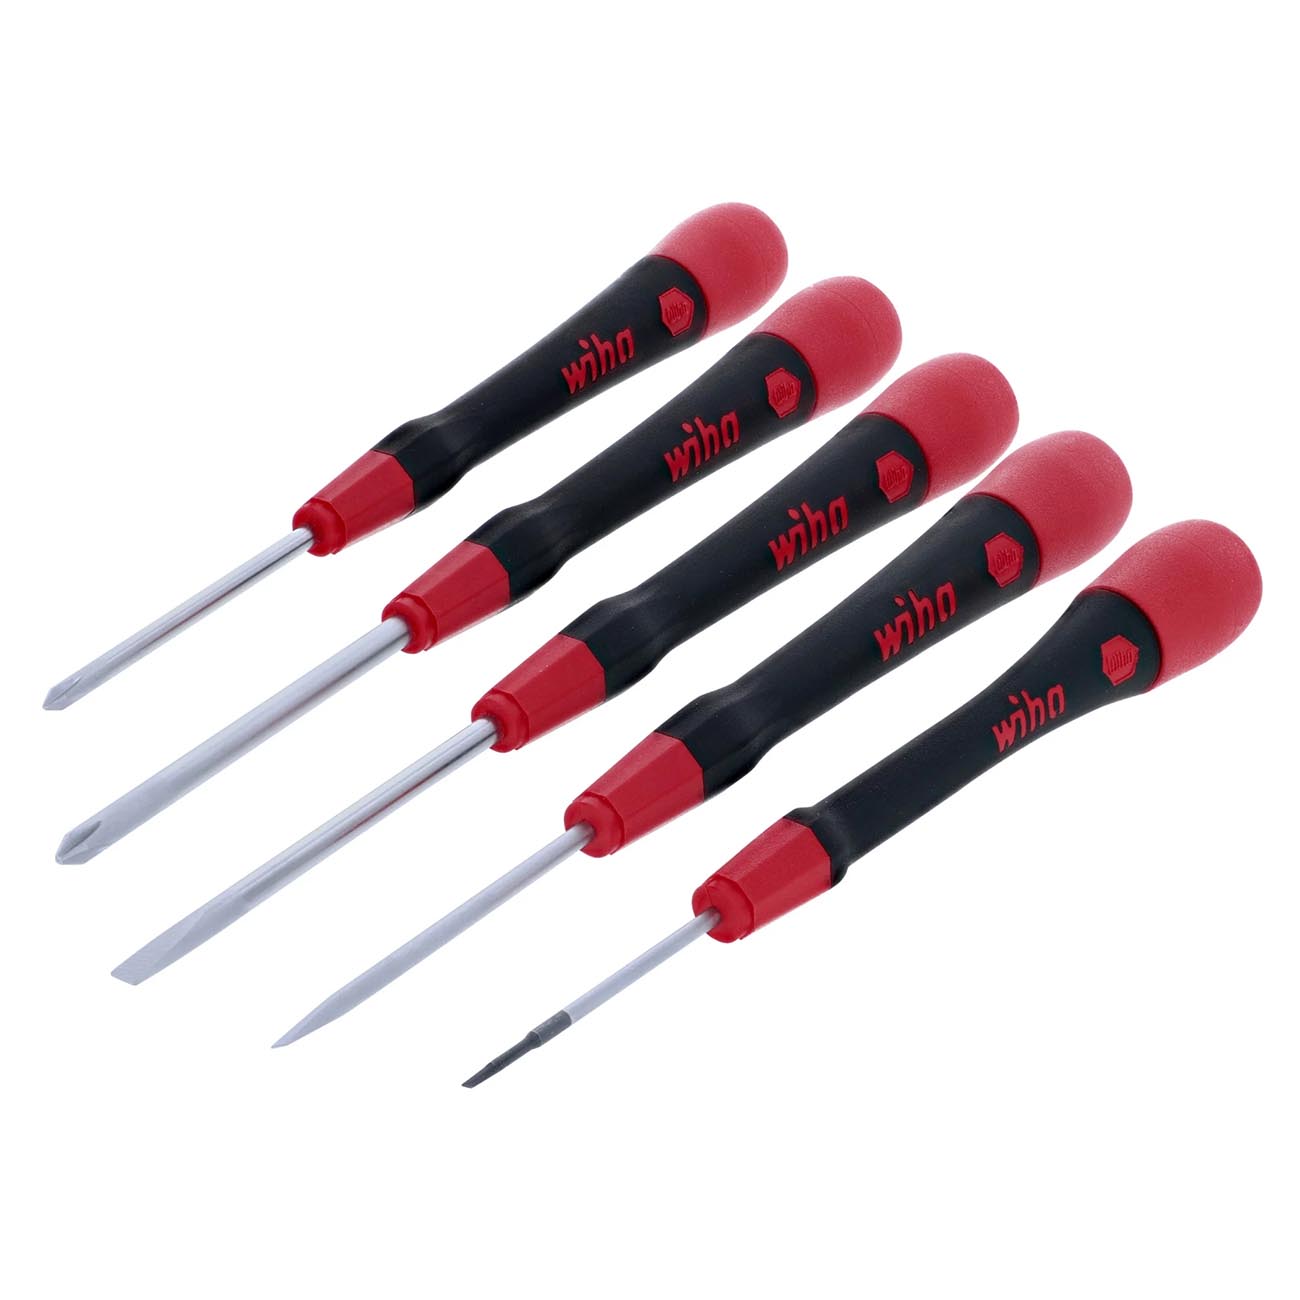 5 PIECE PICOFINISH SLOTTED AND PHILLIPS PRECISION SCREWDRIVER SET